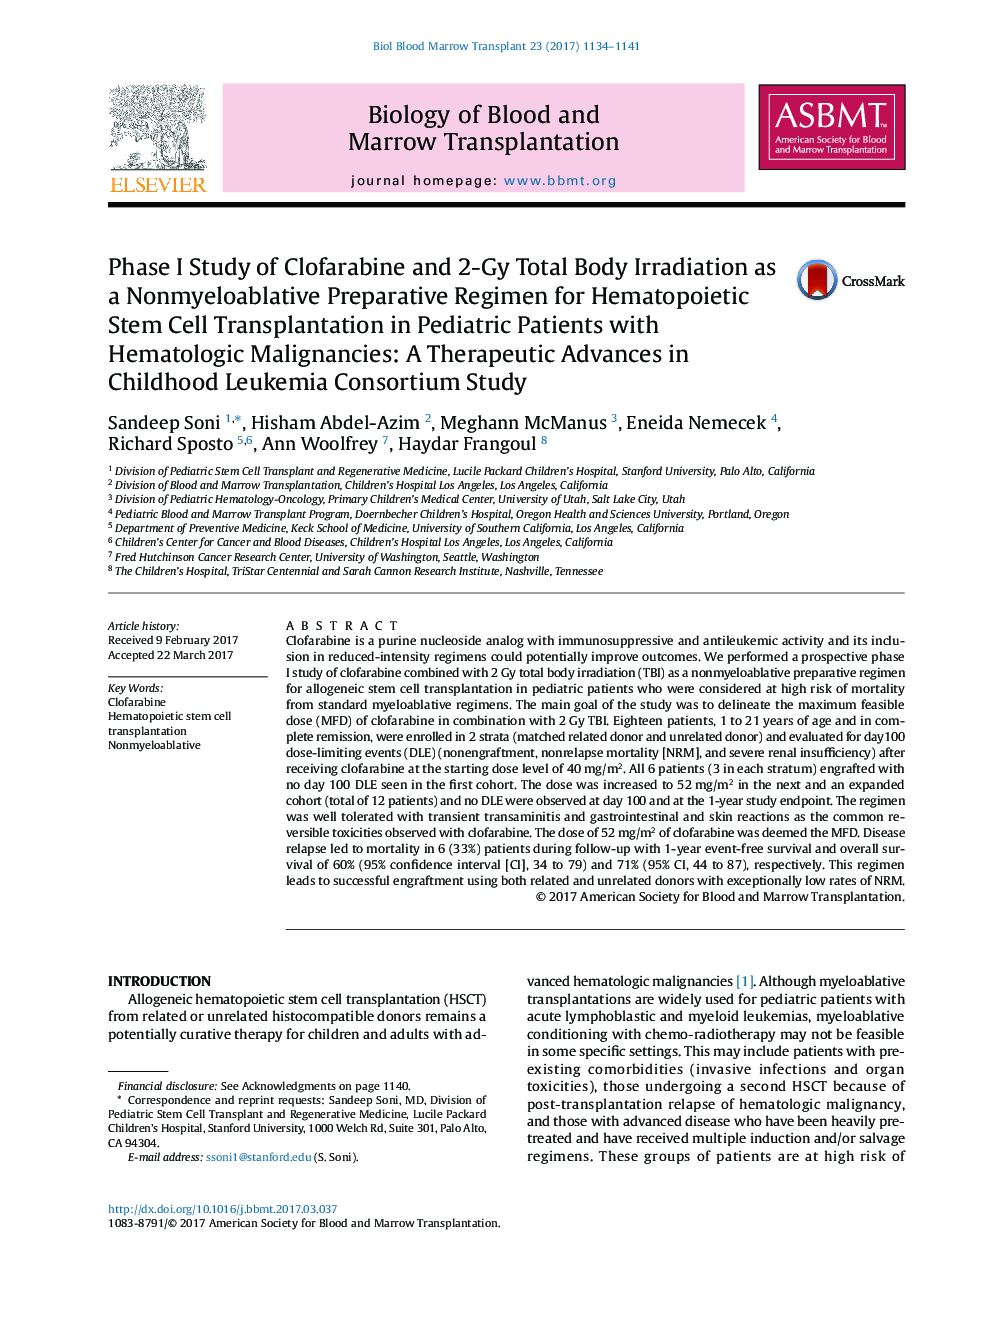 Phase I Study of Clofarabine and 2-Gy Total Body Irradiation as a Nonmyeloablative Preparative Regimen for Hematopoietic Stem Cell Transplantation in Pediatric Patients with Hematologic Malignancies: A Therapeutic Advances in Childhood Leukemia Consortium